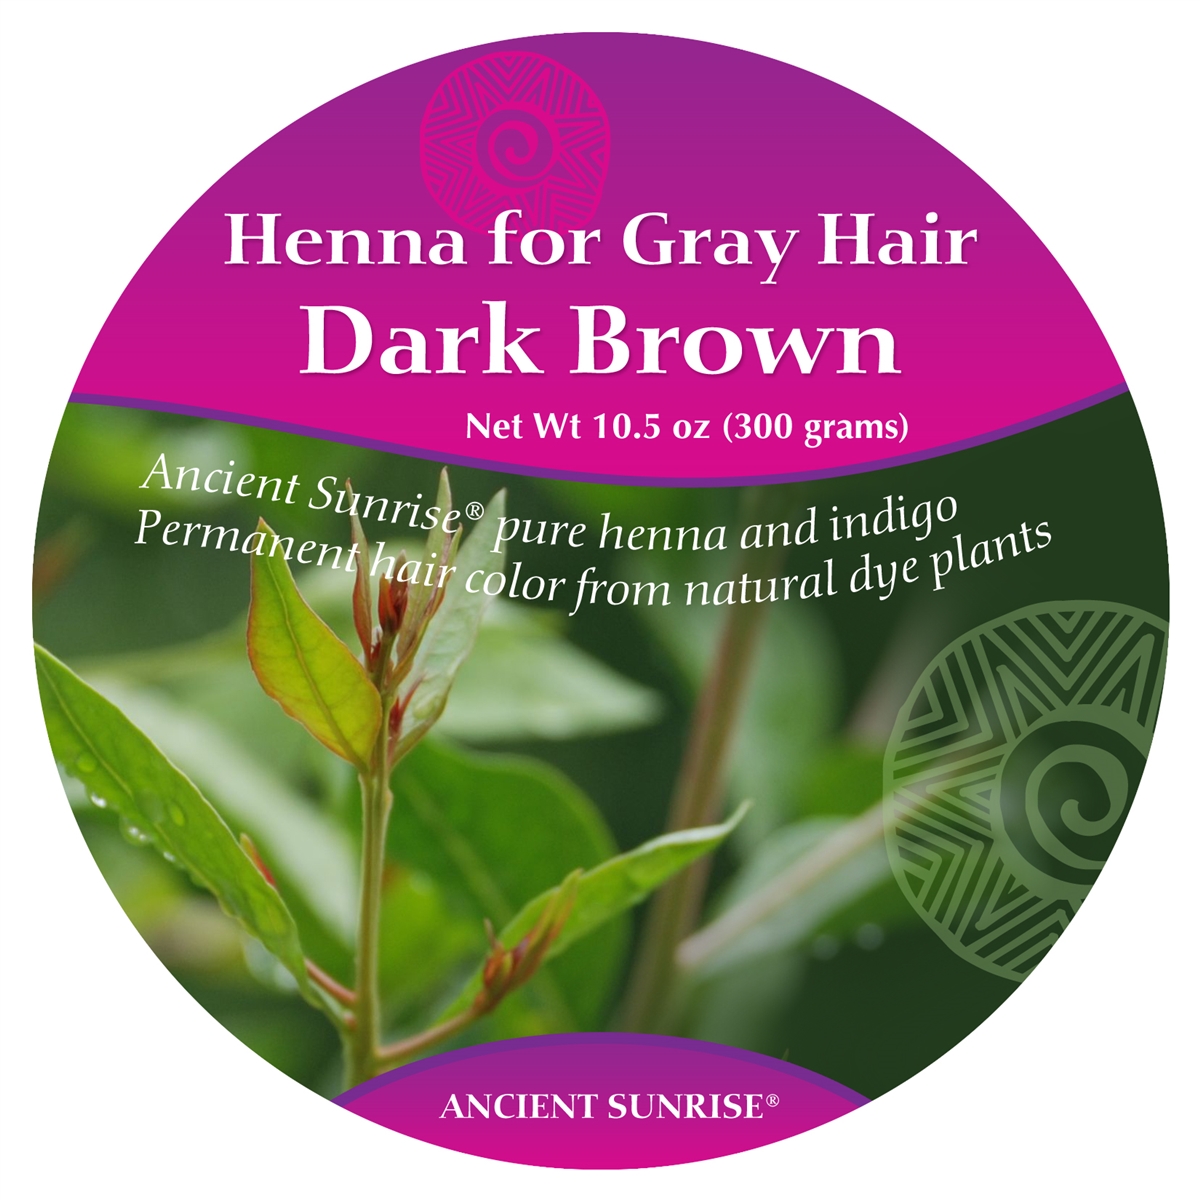 Sample Henna for Gray hair Dark Brown Kit, restore strength and shine,  natural hair product 